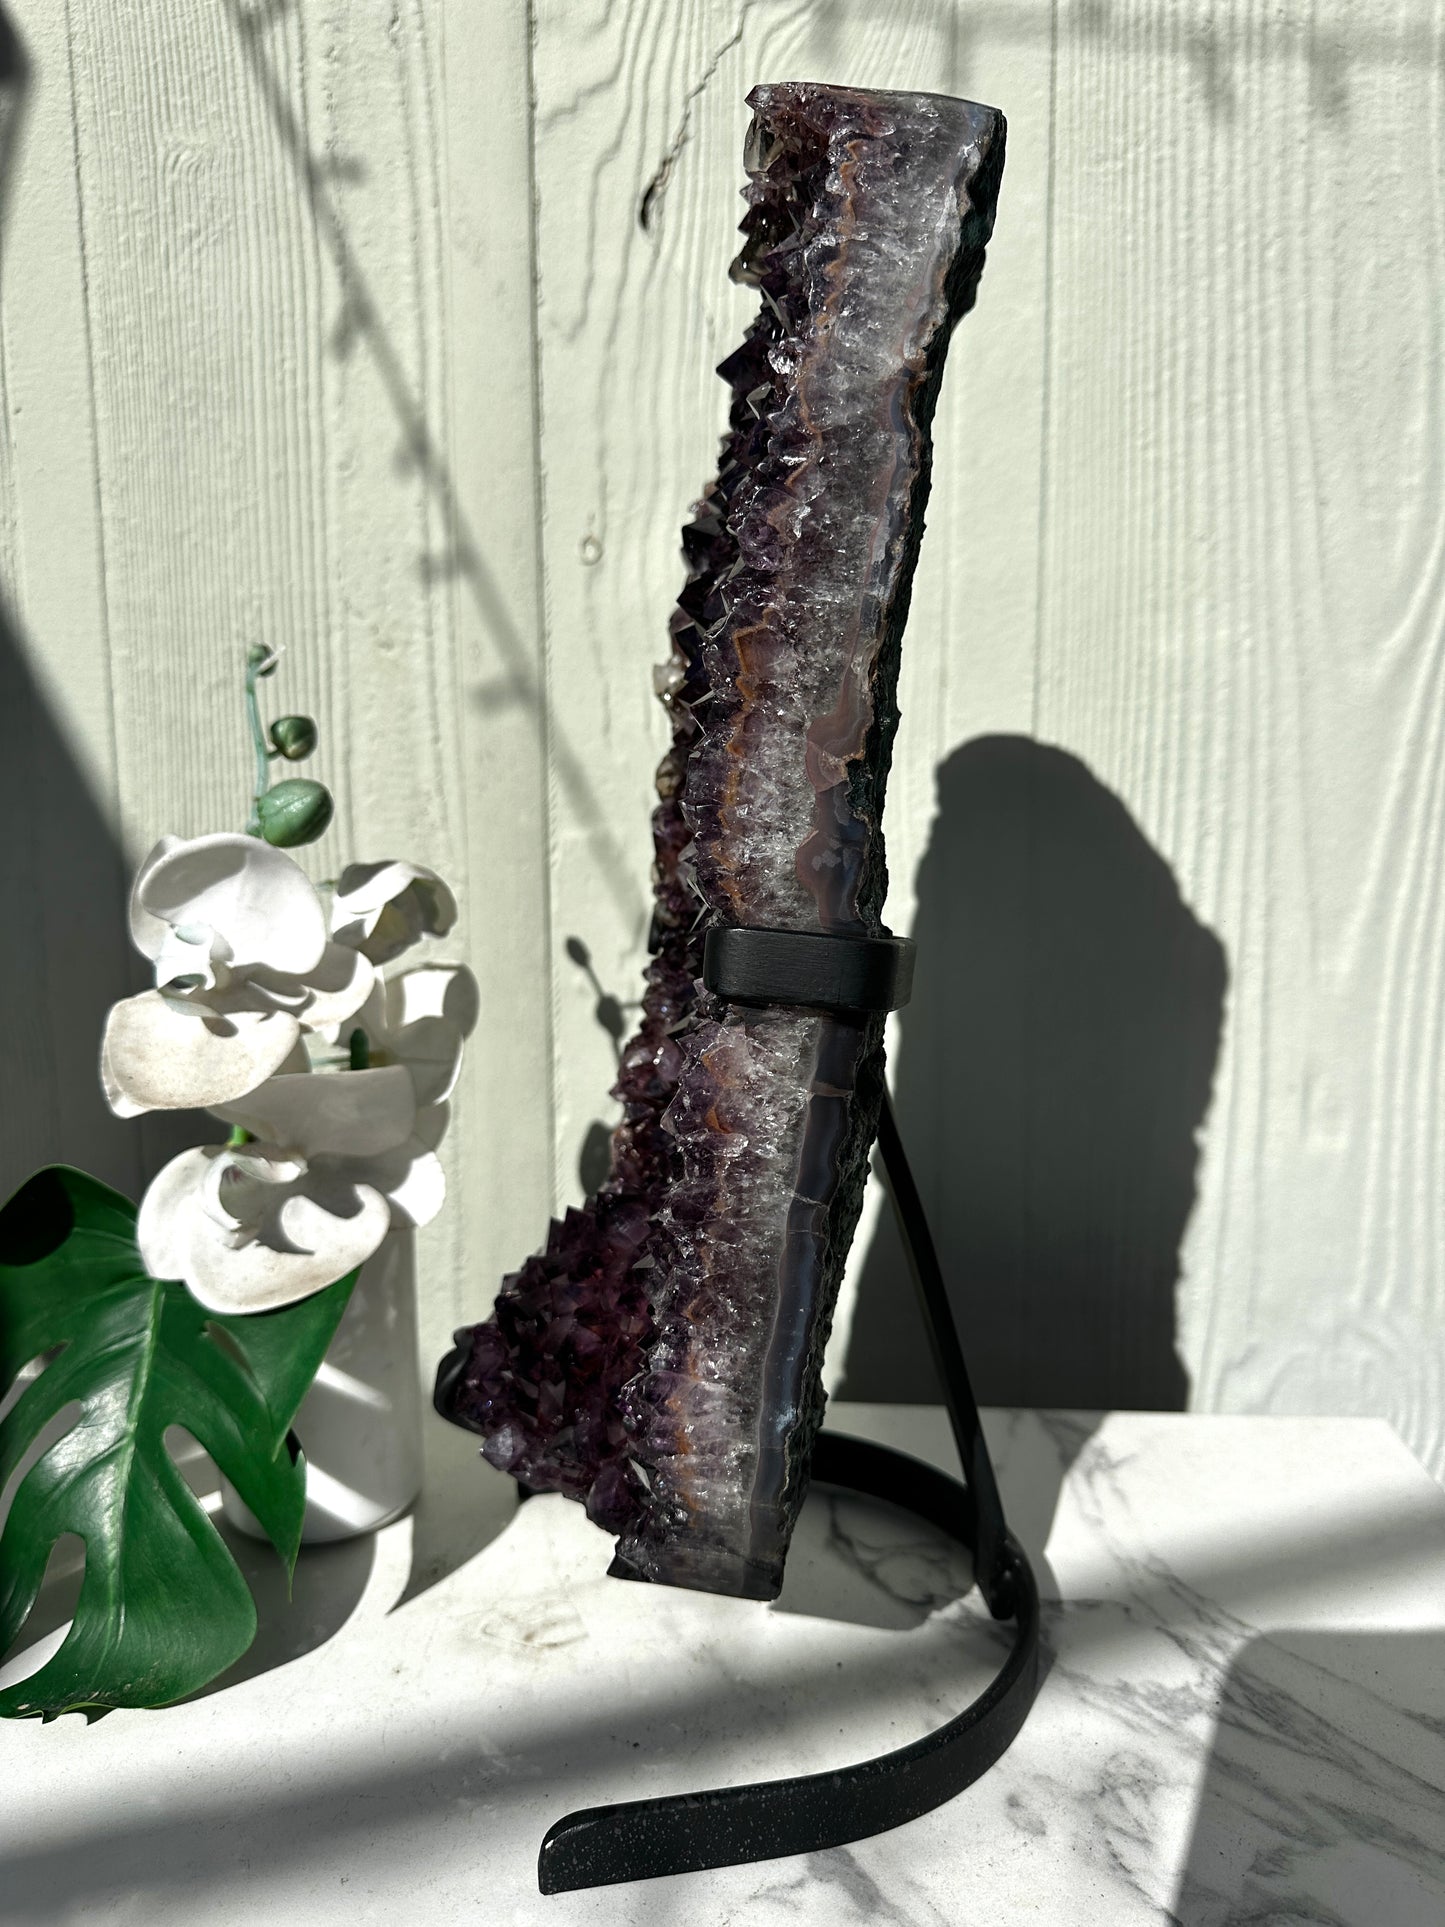 Purple Amethyst cluster with Calcite formation on stand